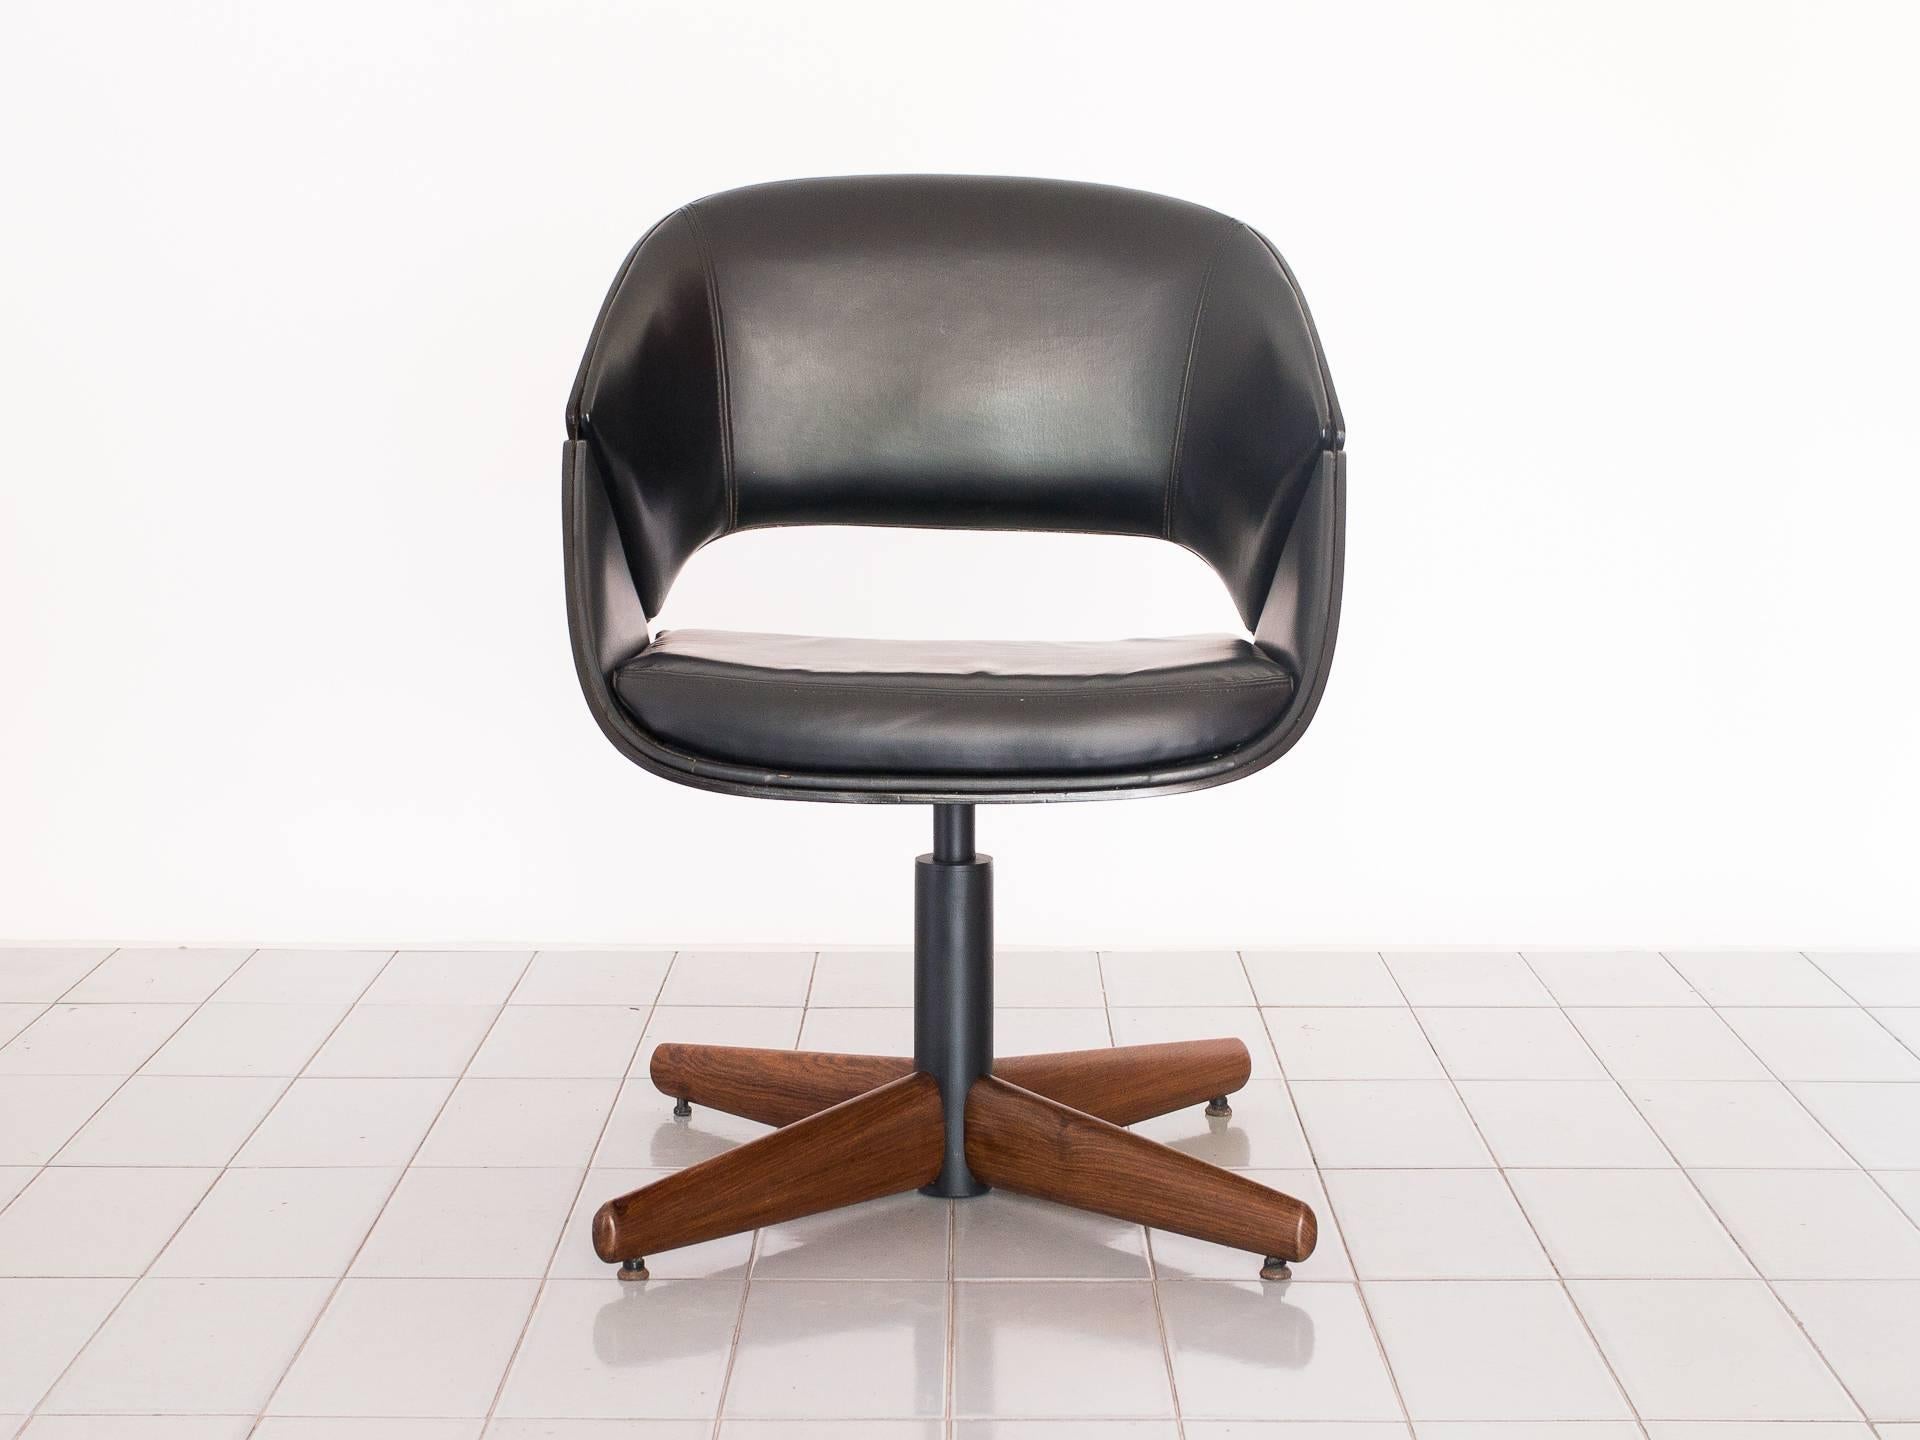 Beautiful office chair designed by Jean Gillon and produced in Brazil by Italma, late 1960s. Solid Louro Preto wood feet. The chair doesn't swivel.